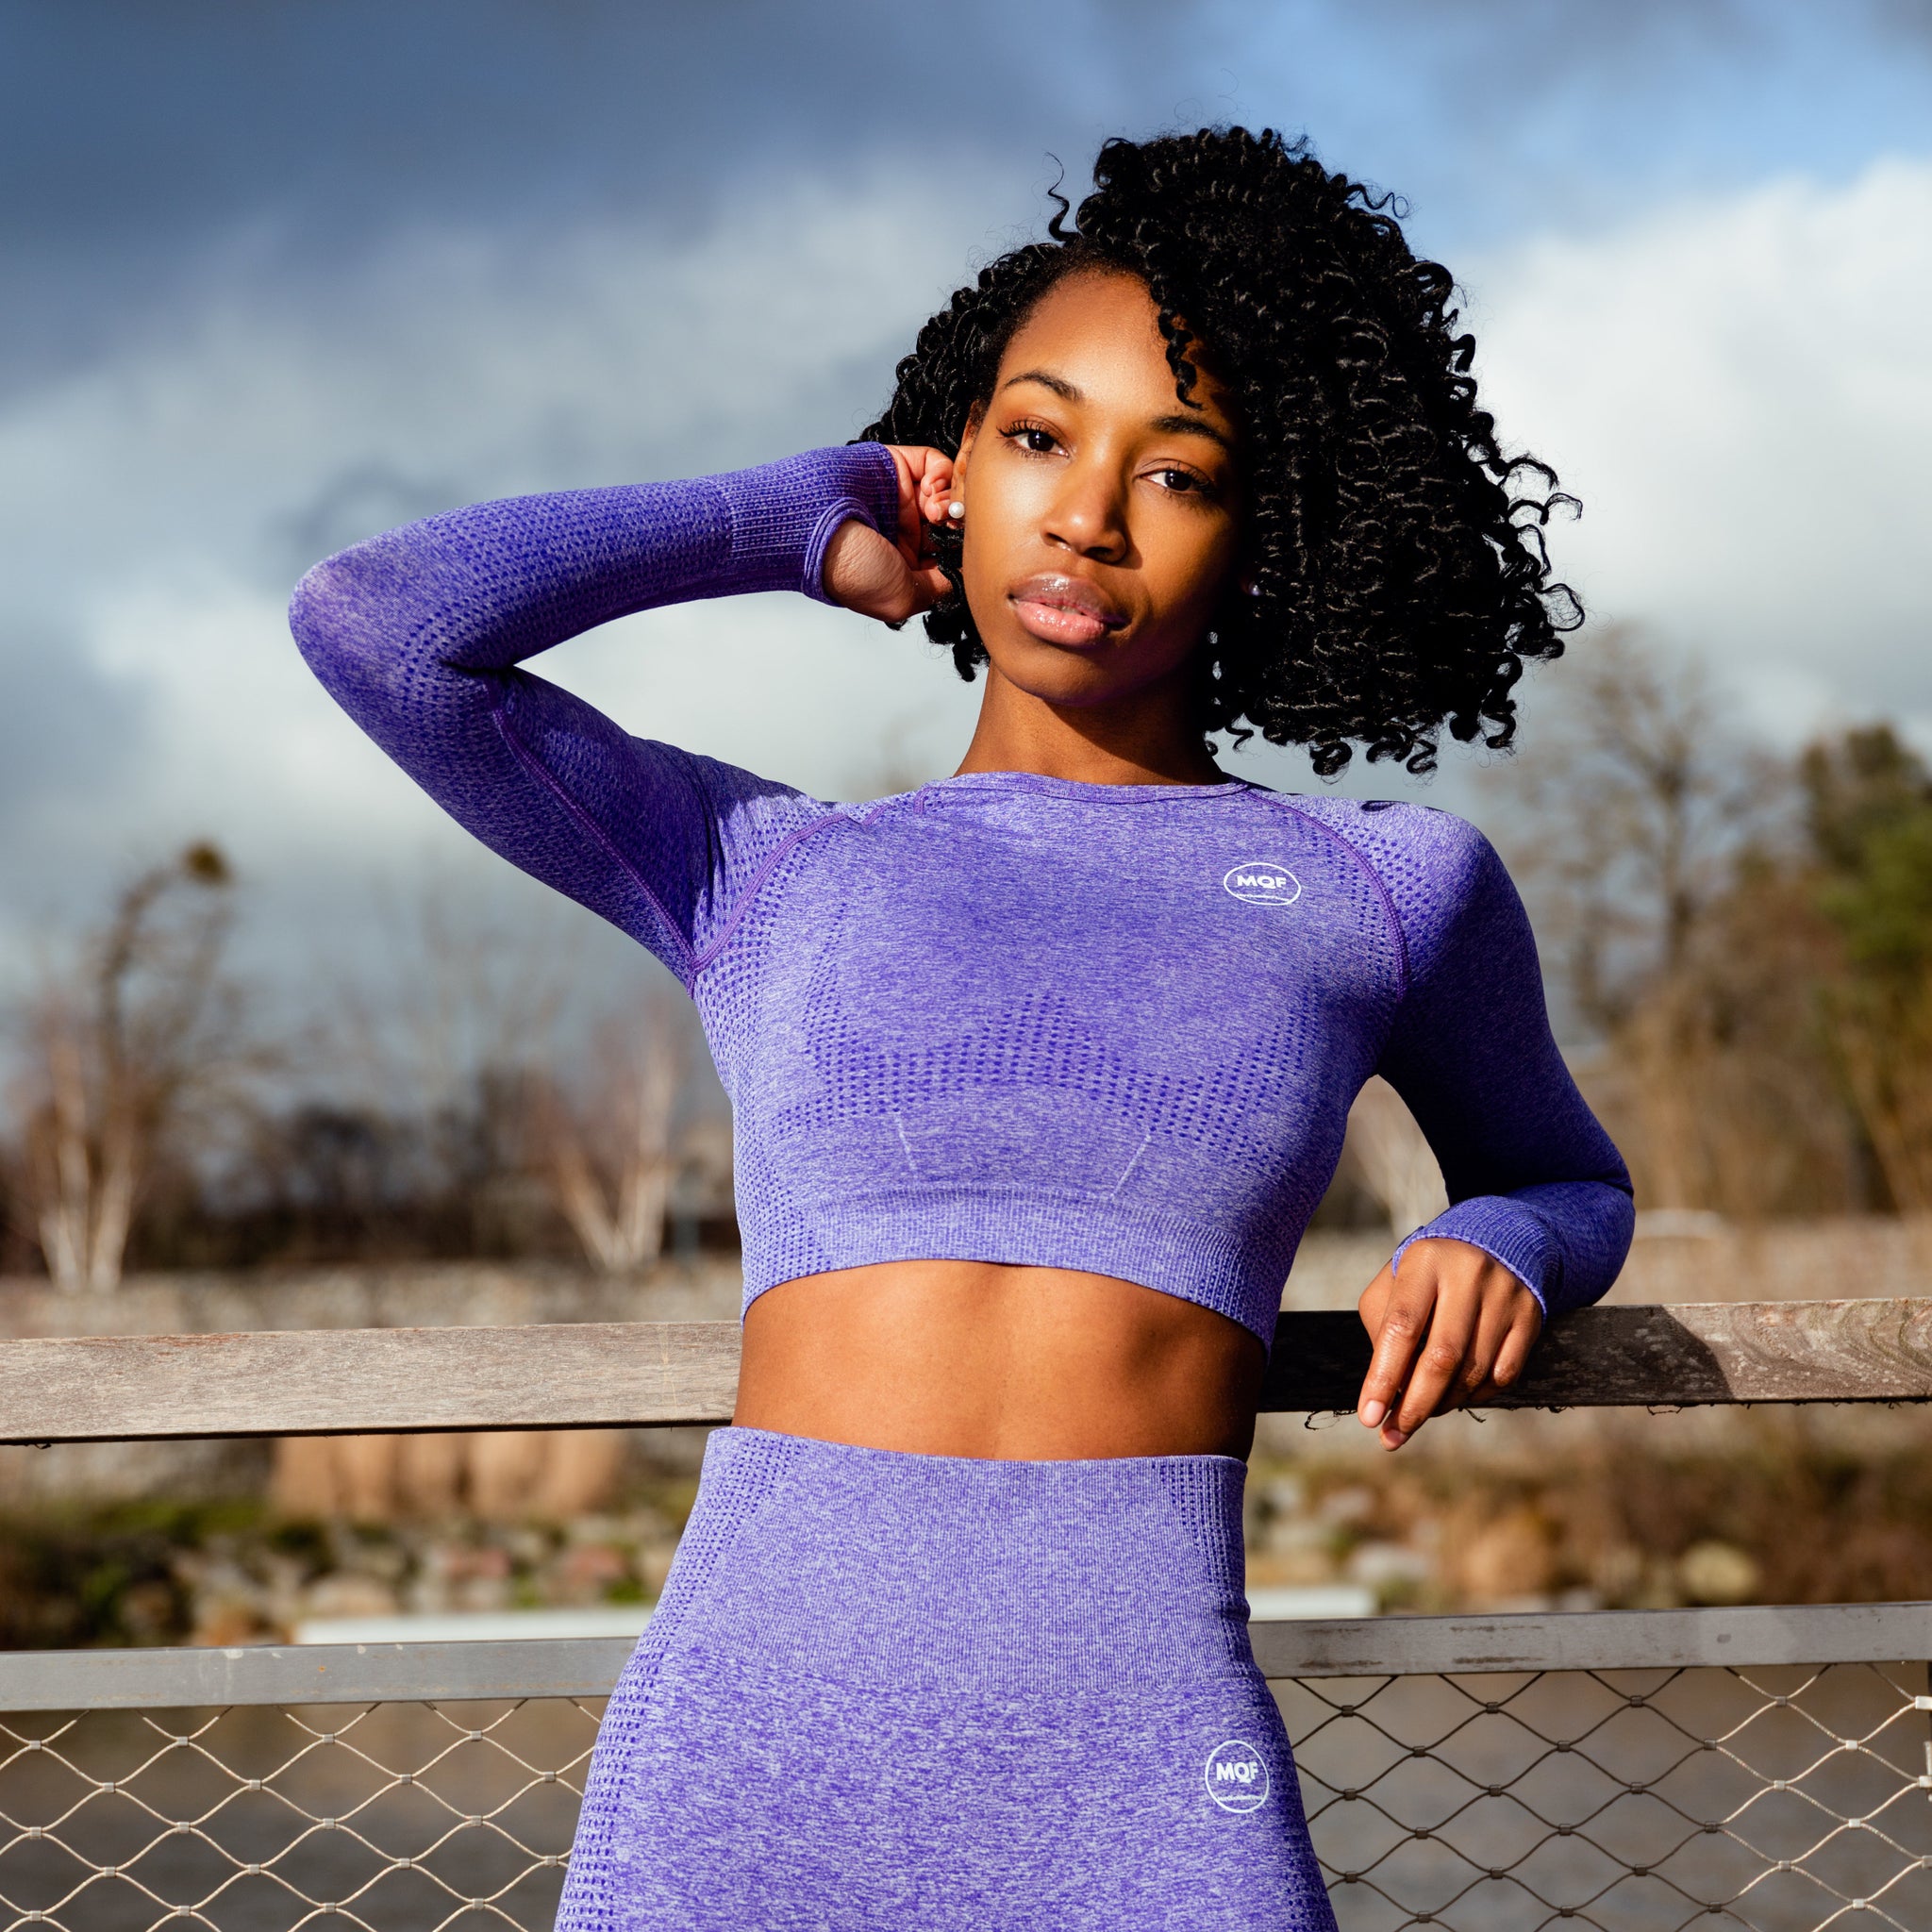 Sport Crop Top - MQF Fitness Clothing - Purple